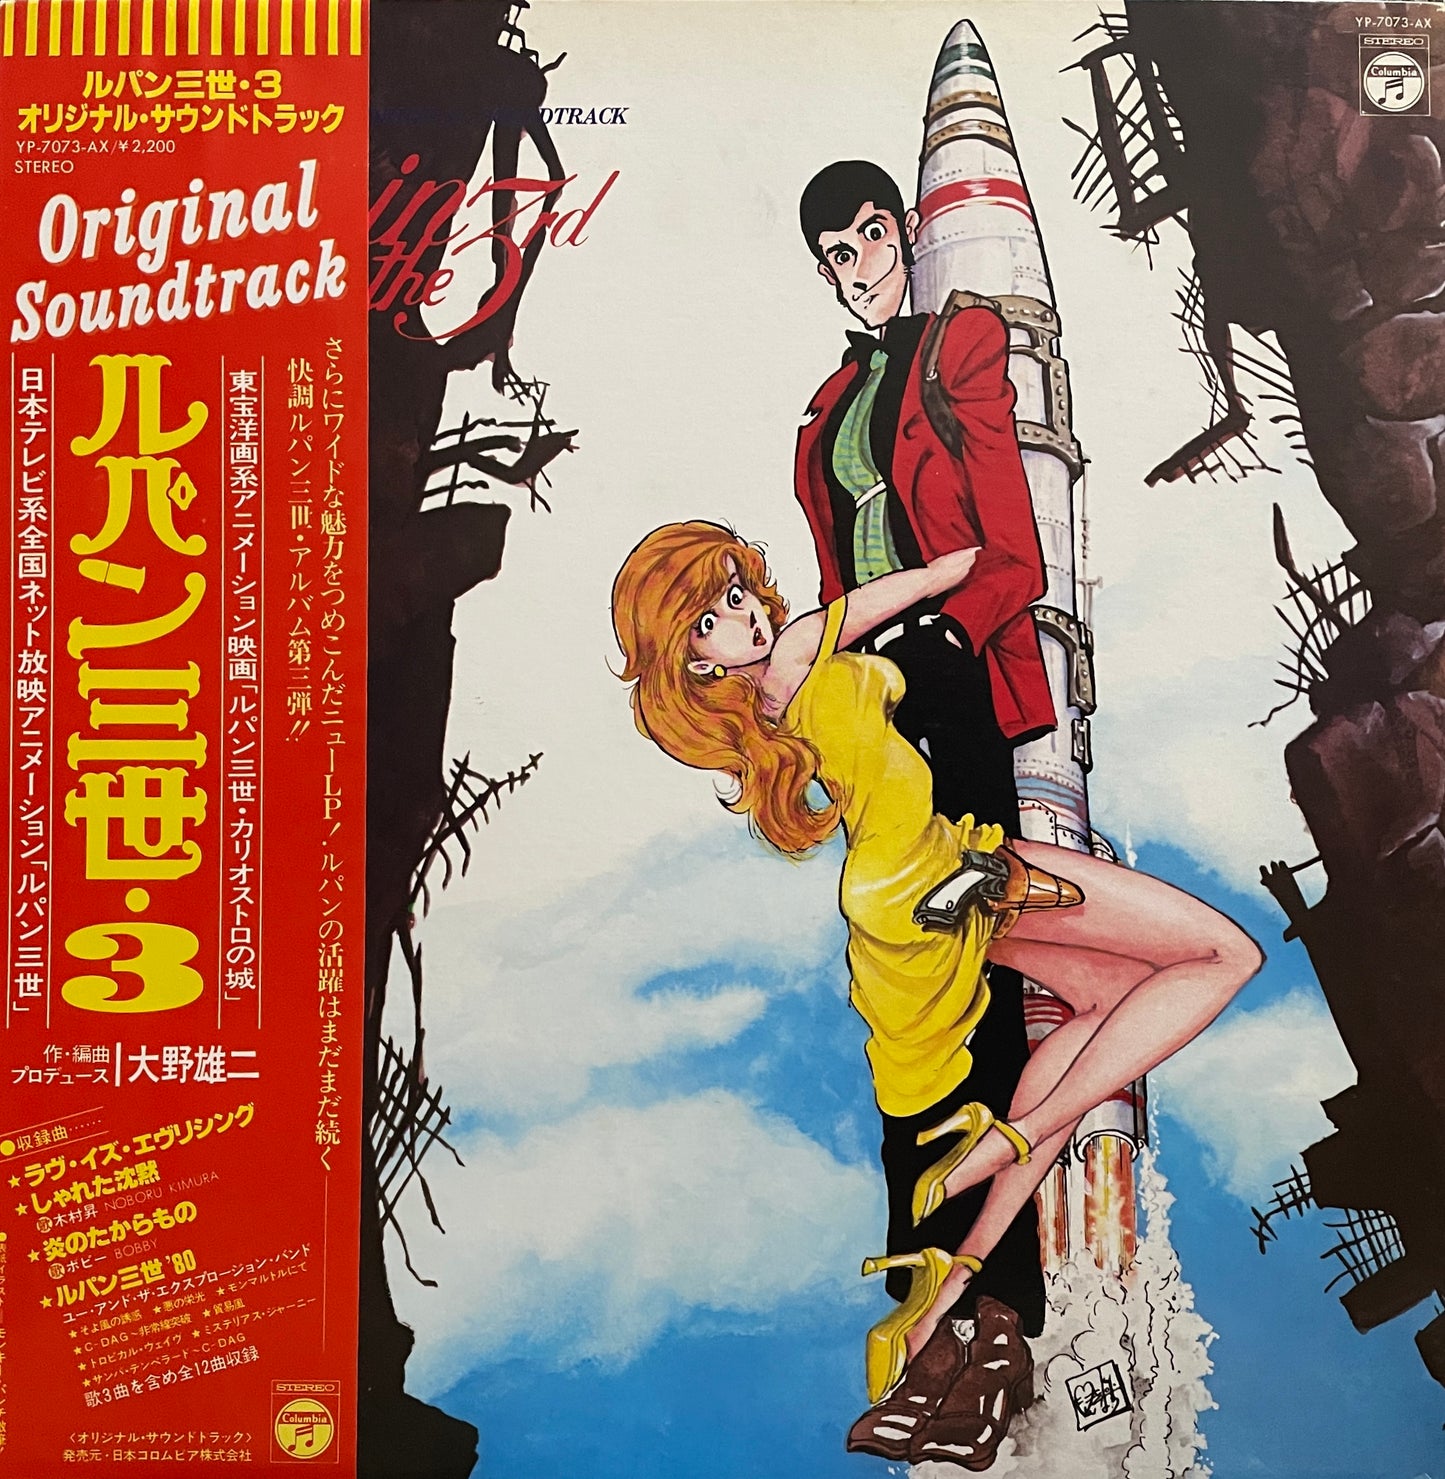 You & The Explosion Band "Lupin The 3rd" OST (1979)